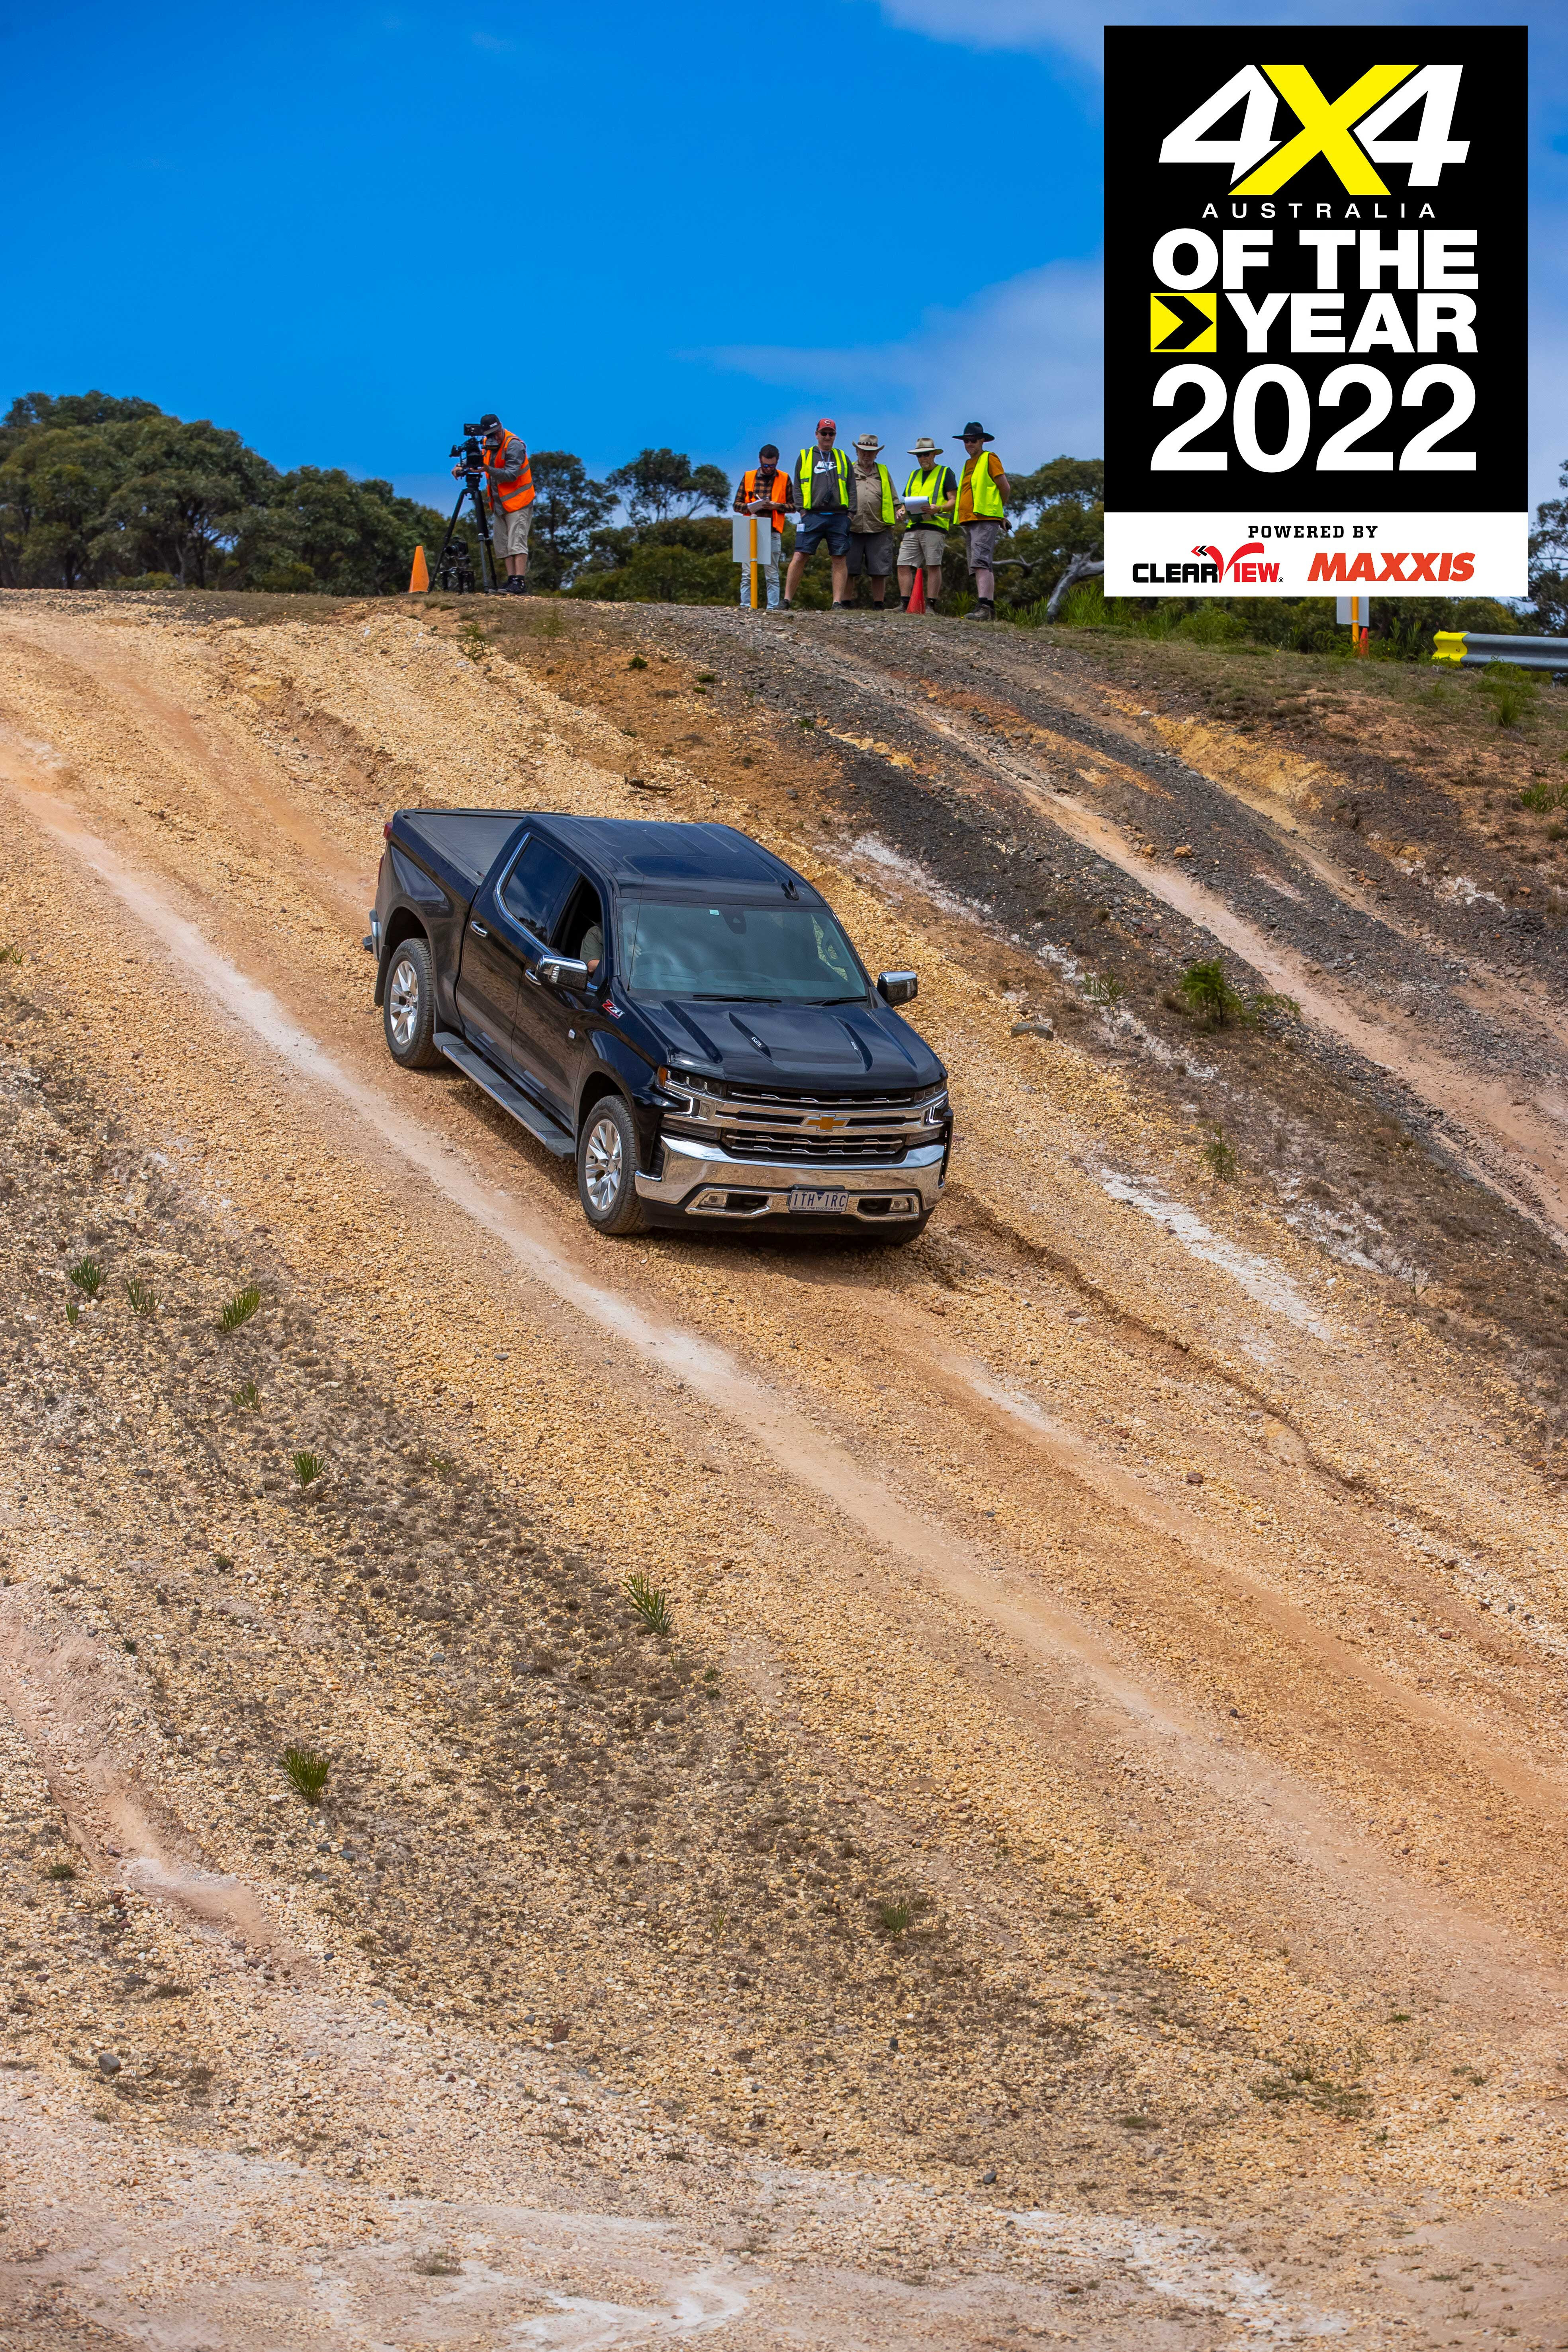 4 X 4 Australia Reviews 2022 4 X 4 Of The Year 2022 4 X 4 Of The Year Silverado 1